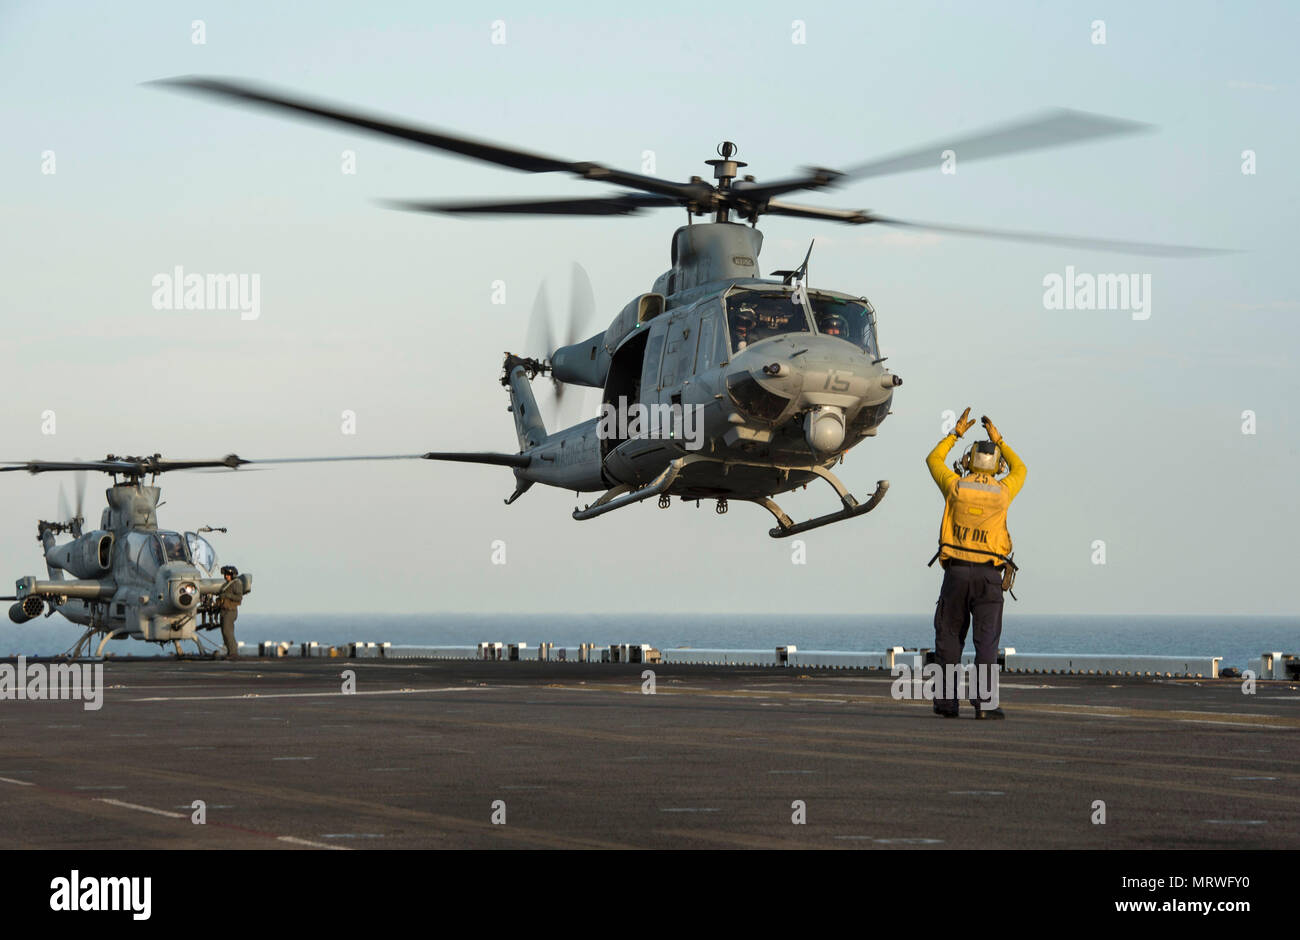 170706-N-LI768-898    PACIFIC OCEAN (July 6, 2017) Aviation Boatswain’s Mate (Handling) 3rd Class Drake Valdiviezo, from Lehi, Utah, signals for a UH-1Y Huey, assigned to the “Gunfighters” of Marine Light Attack Helicopter Squadron (HMLA) 369, to take off from the flight deck of the amphibious assault ship USS Makin Island (LHD 8). Makin Island is conducting operations off the coast of Southern California. (U.S. Navy photo by Mass Communication Specialist 2nd Class Devin M. Langer) Stock Photo